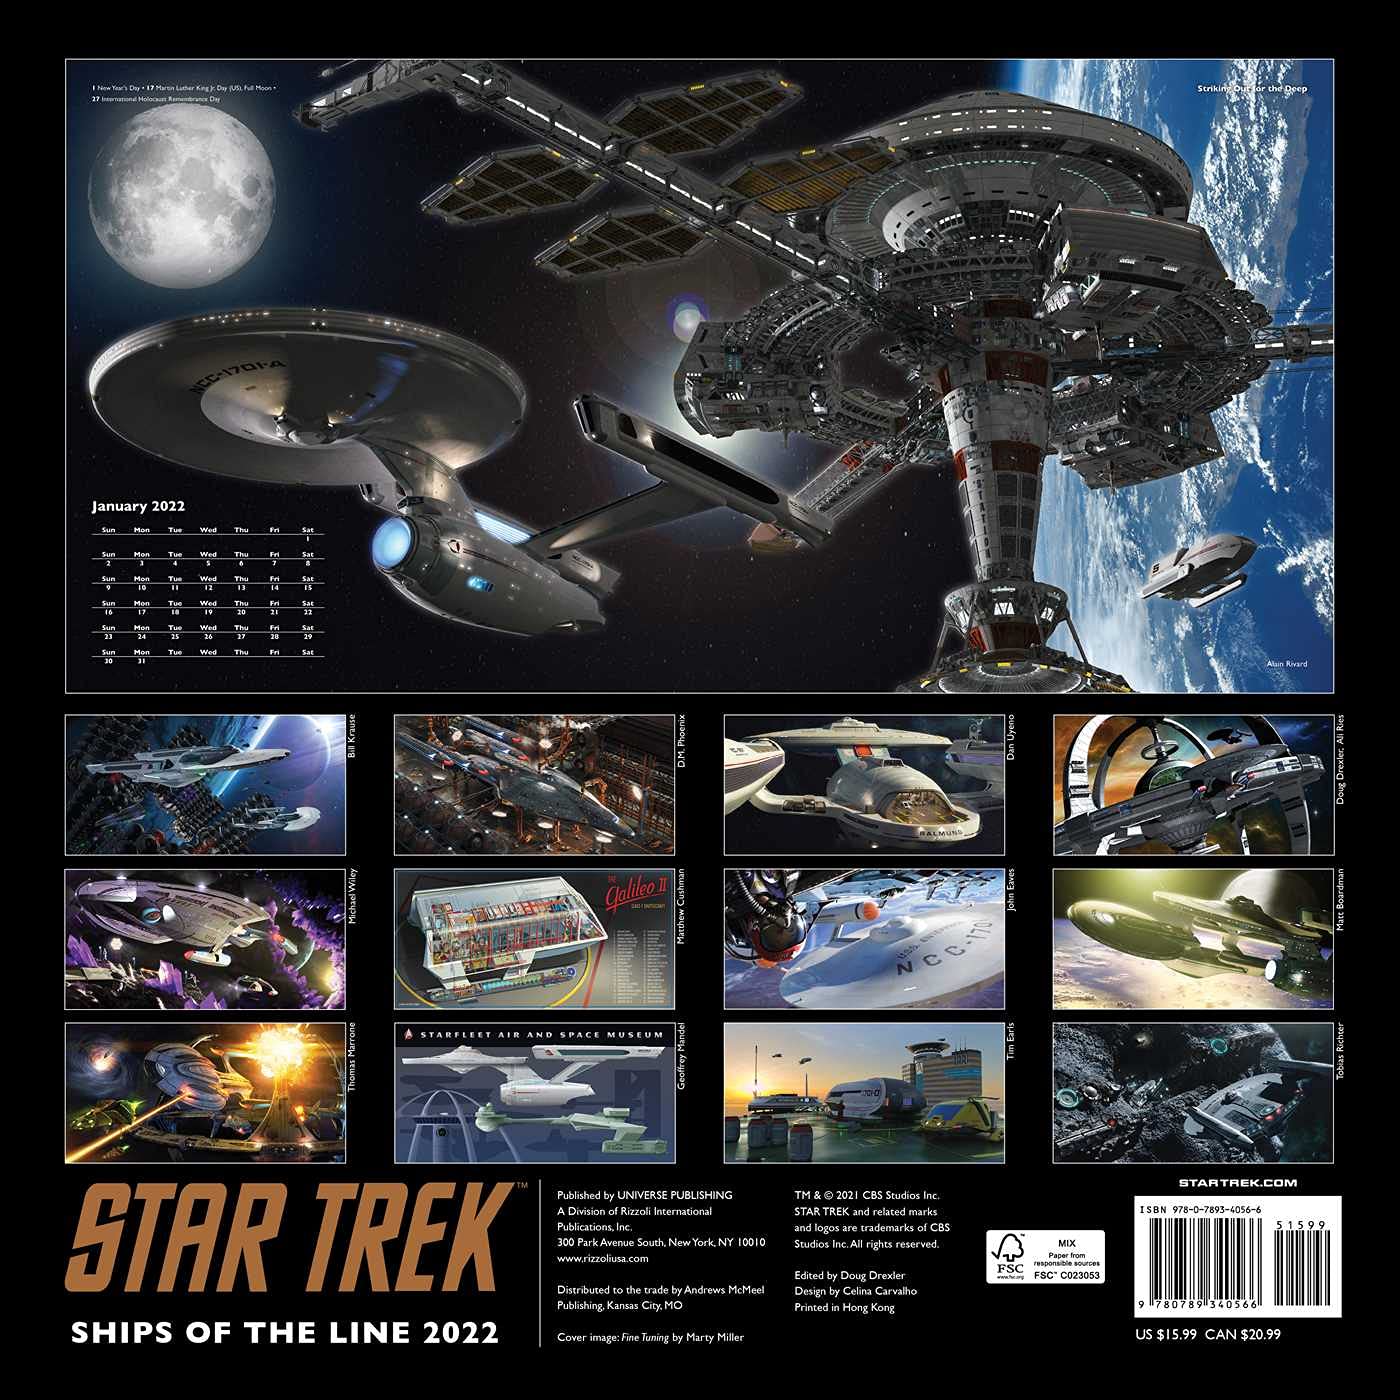 The Trek Collective New backcover previews for the 2022 Star Trek